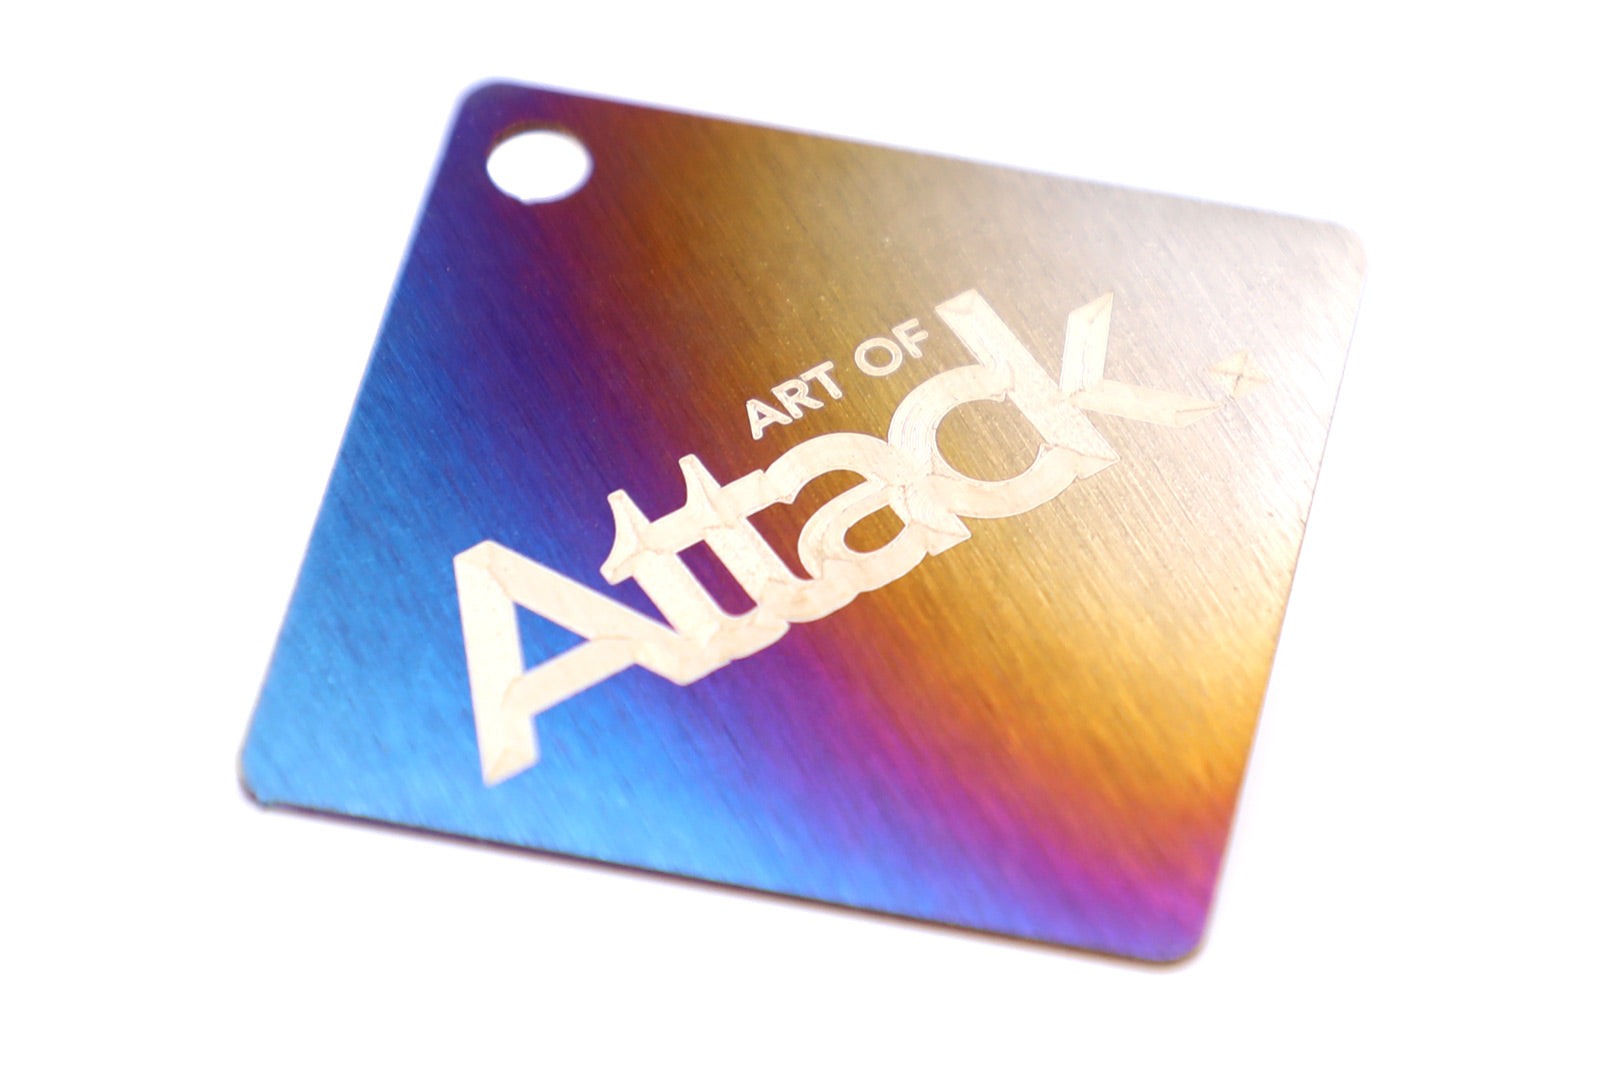 Art of Attack "Definition" Care Package - Limited Run